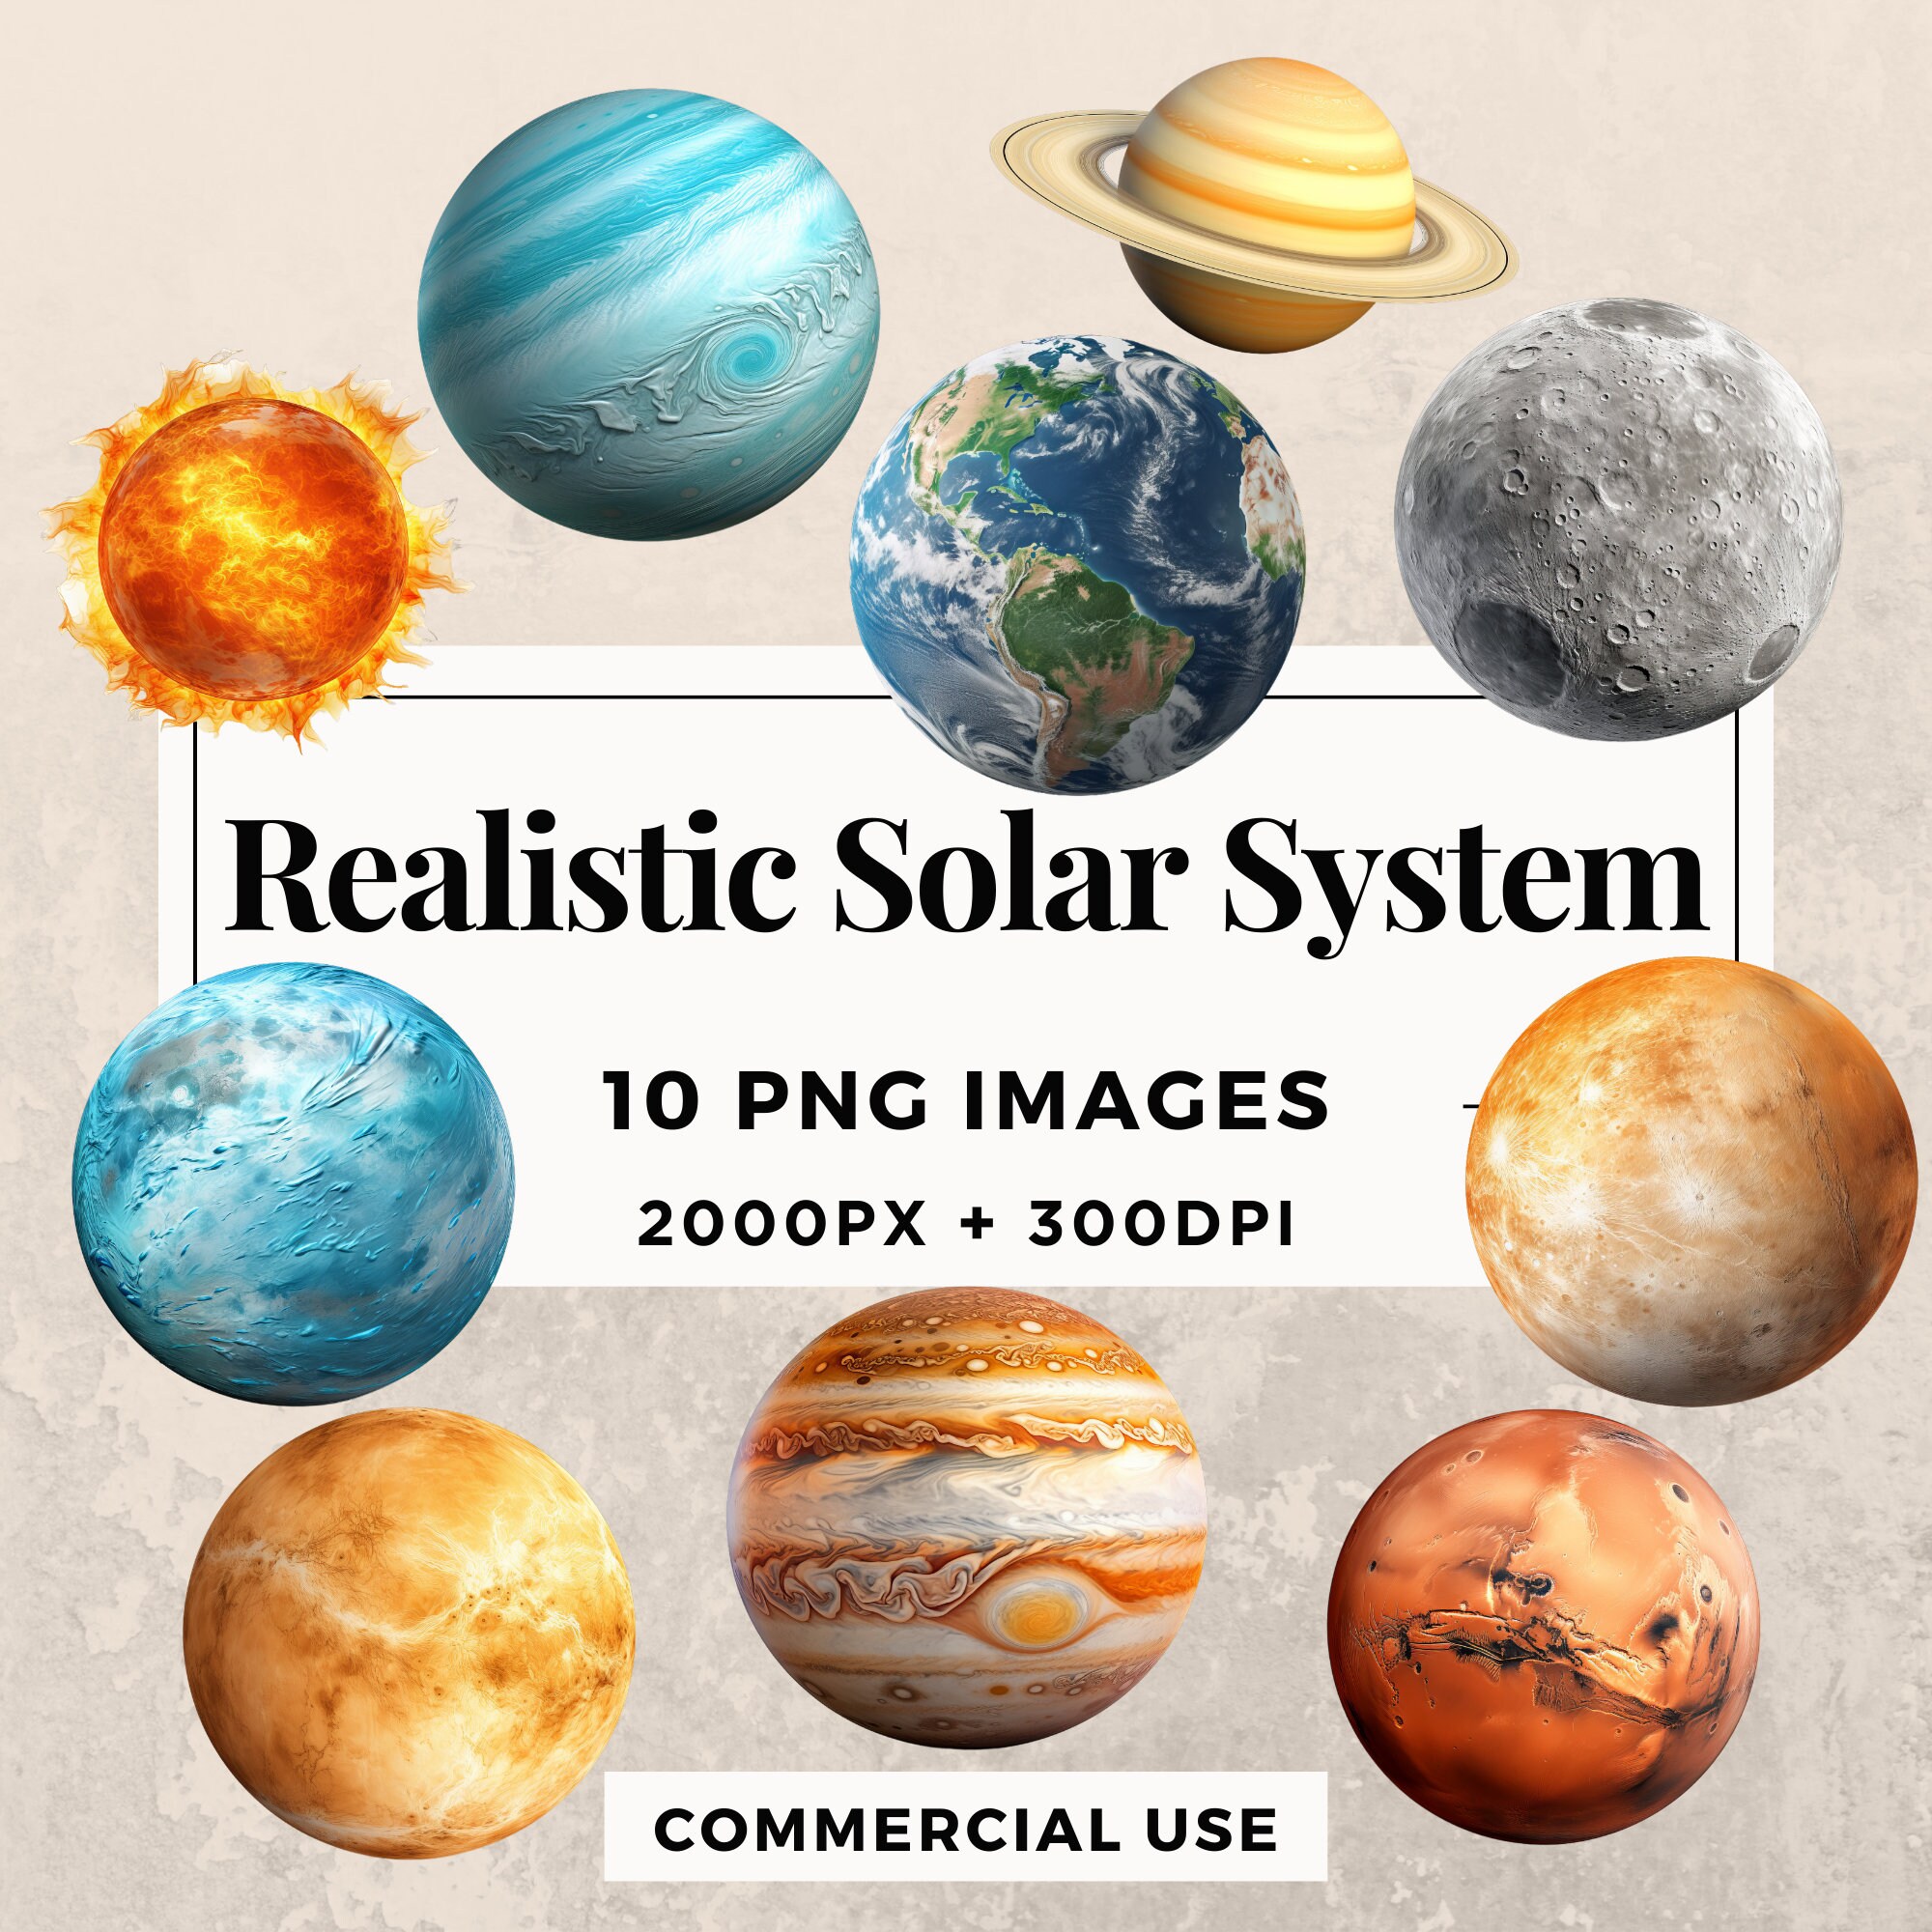 SOLAR SYSTEM diorama DIY Set Instant Download Includes Instructions and  Free Lesson on Planets in Our Solar System 